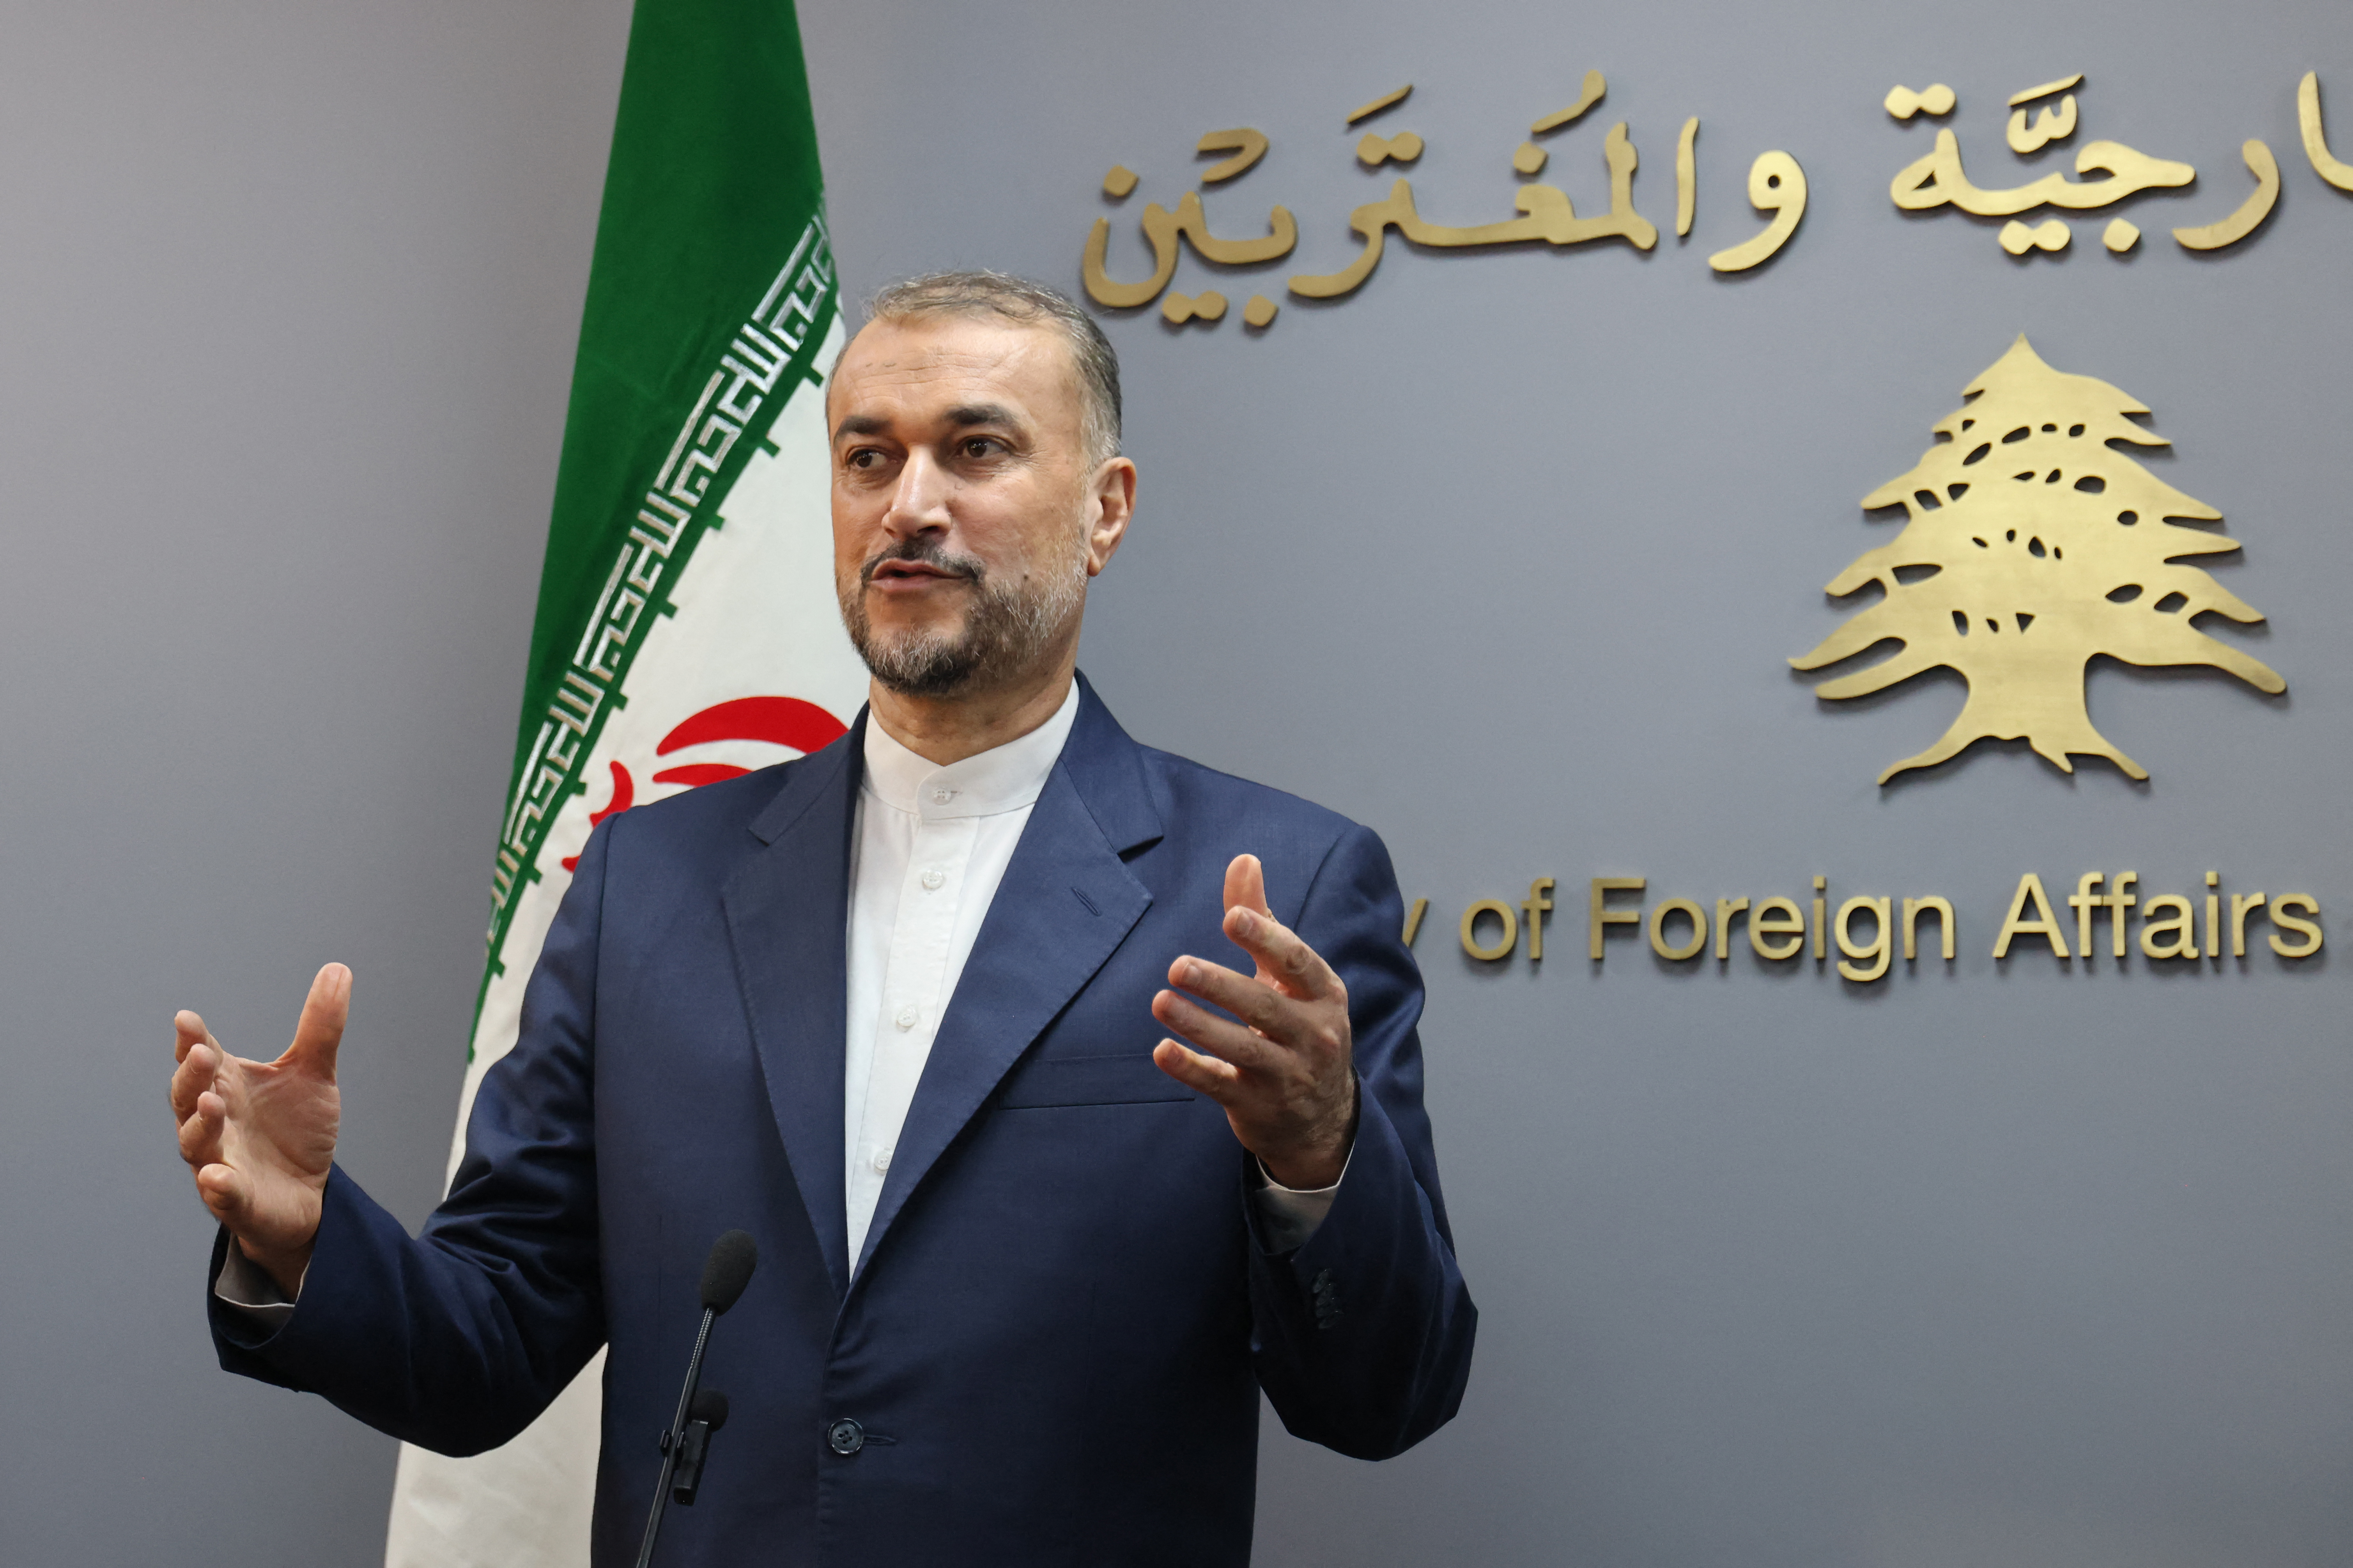 Iranian Foreign Minister Hossein Amir-Abdollahian speaks during a press conference in Beirut, Lebanon, on February 10.